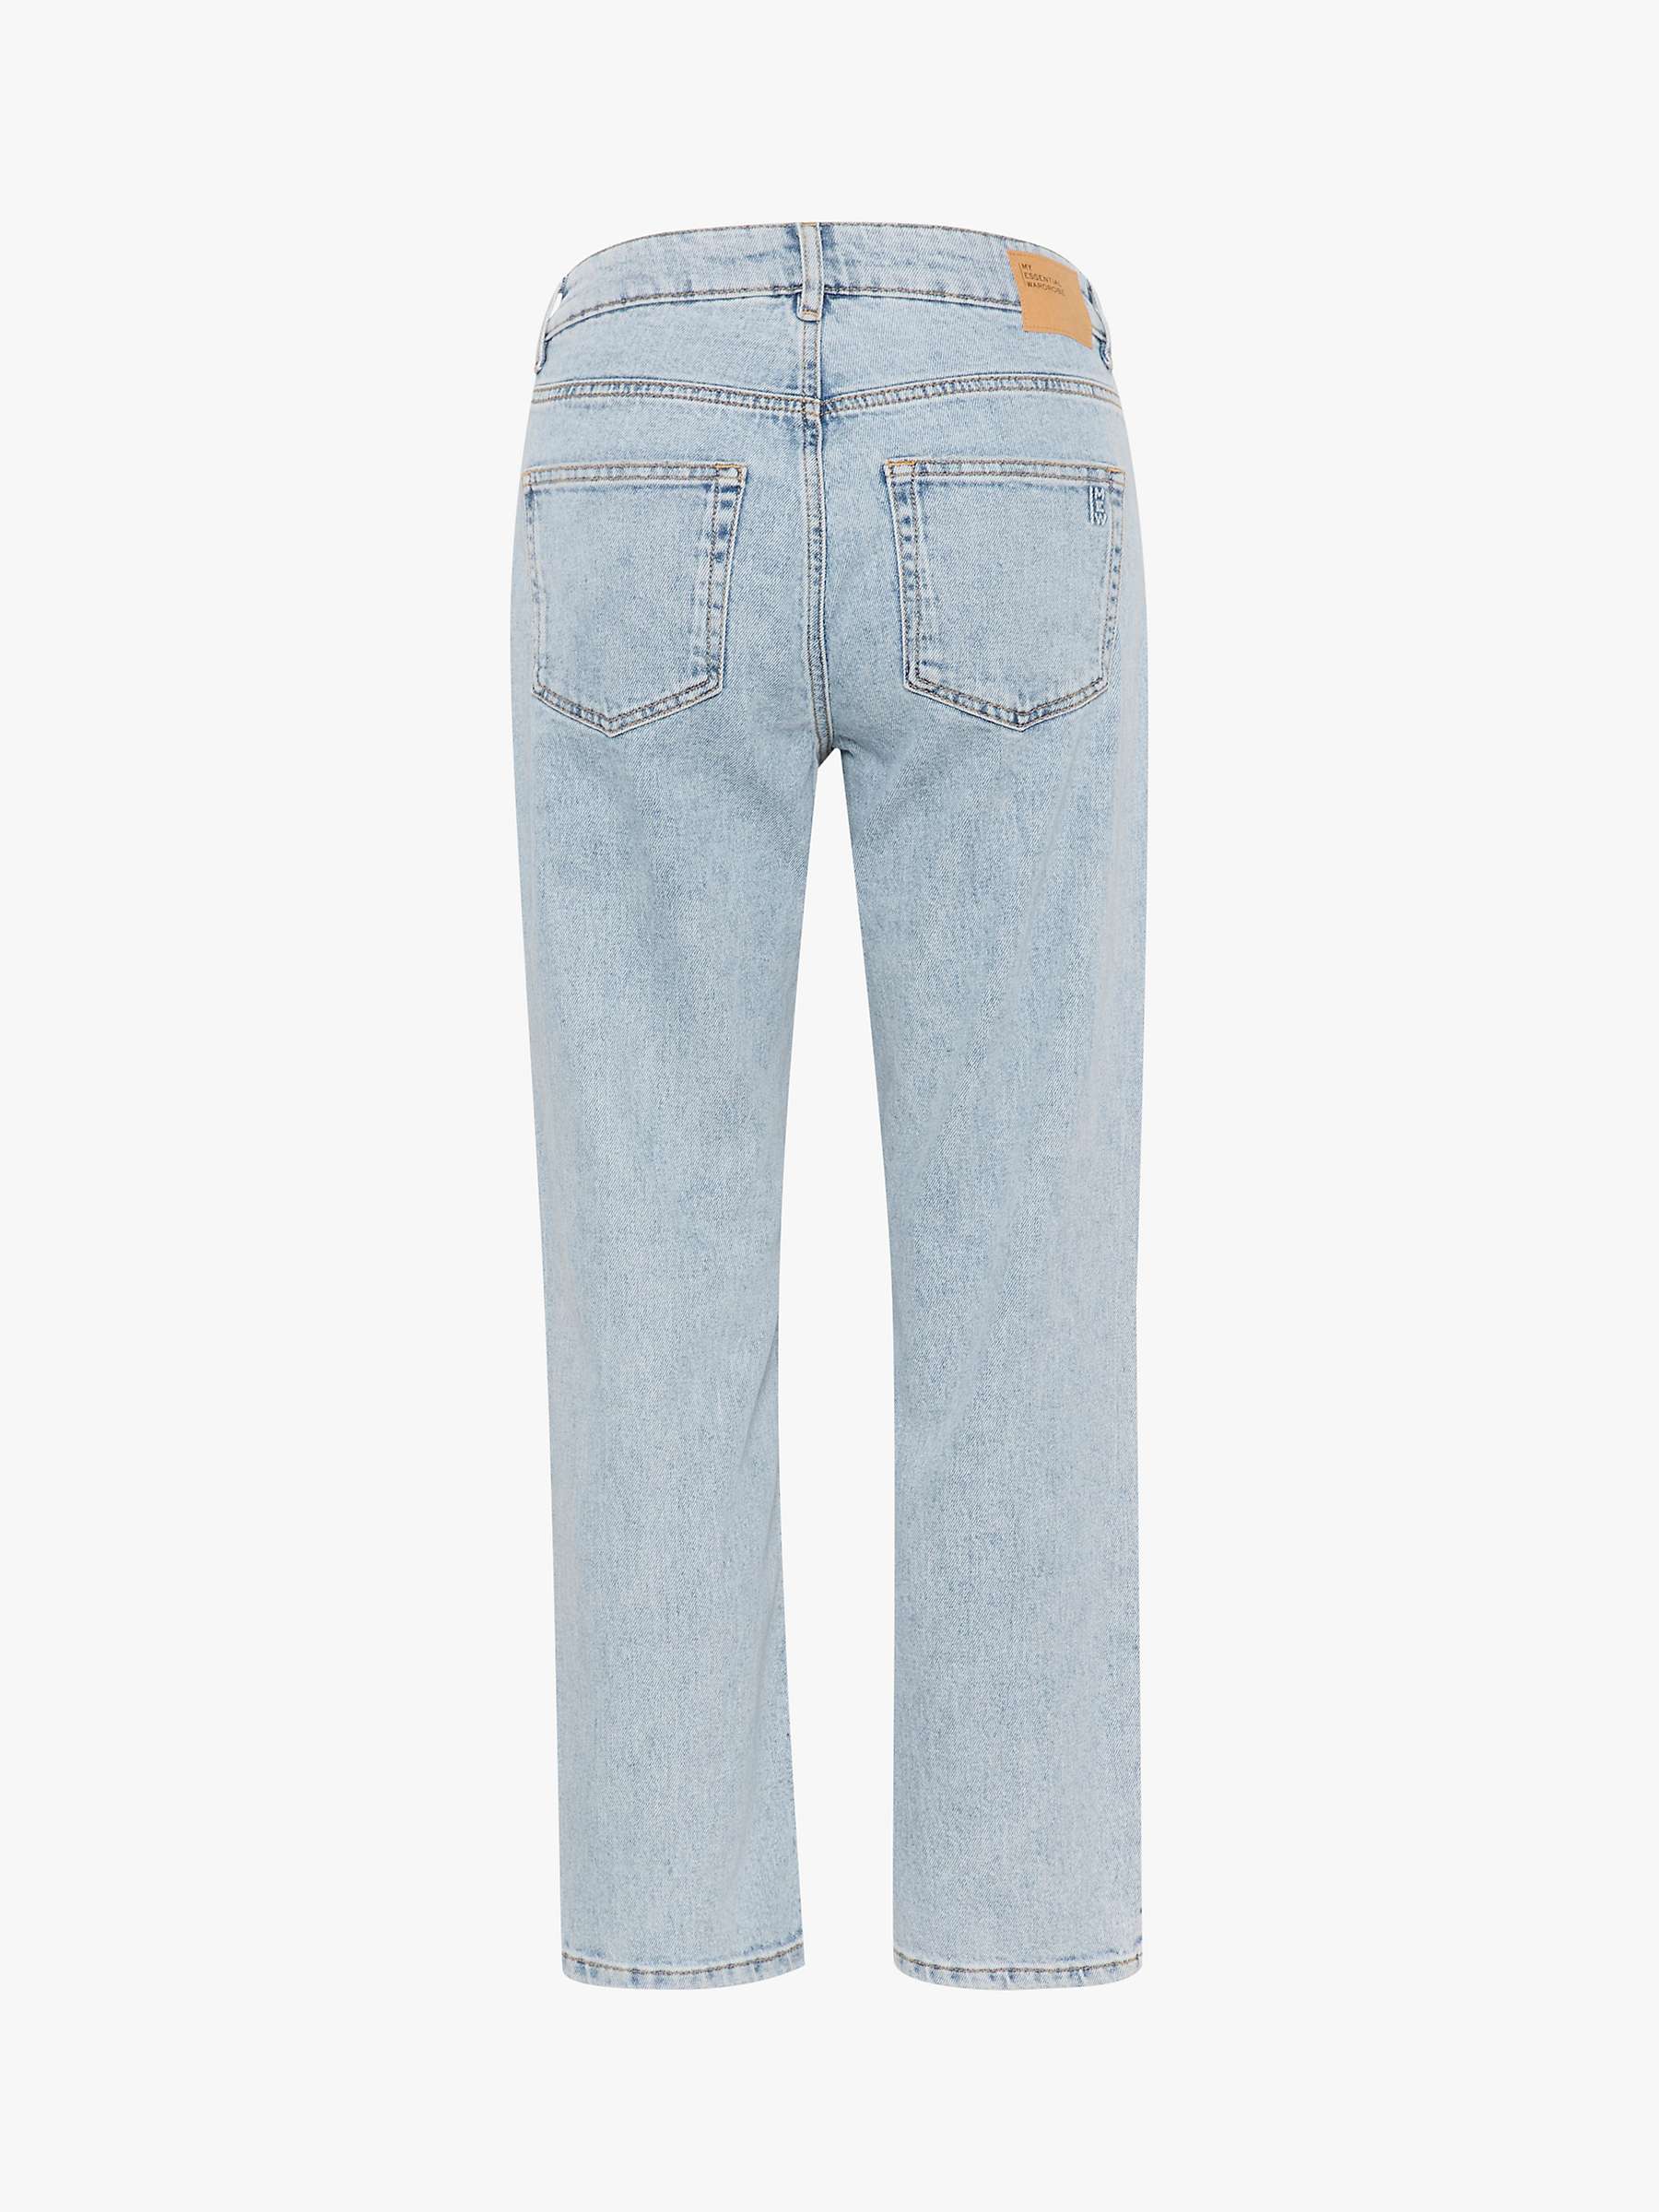 Buy MY ESSENTIAL WARDROBE Lucy High Waist Cropped Jeans, Light Blue Retro Online at johnlewis.com